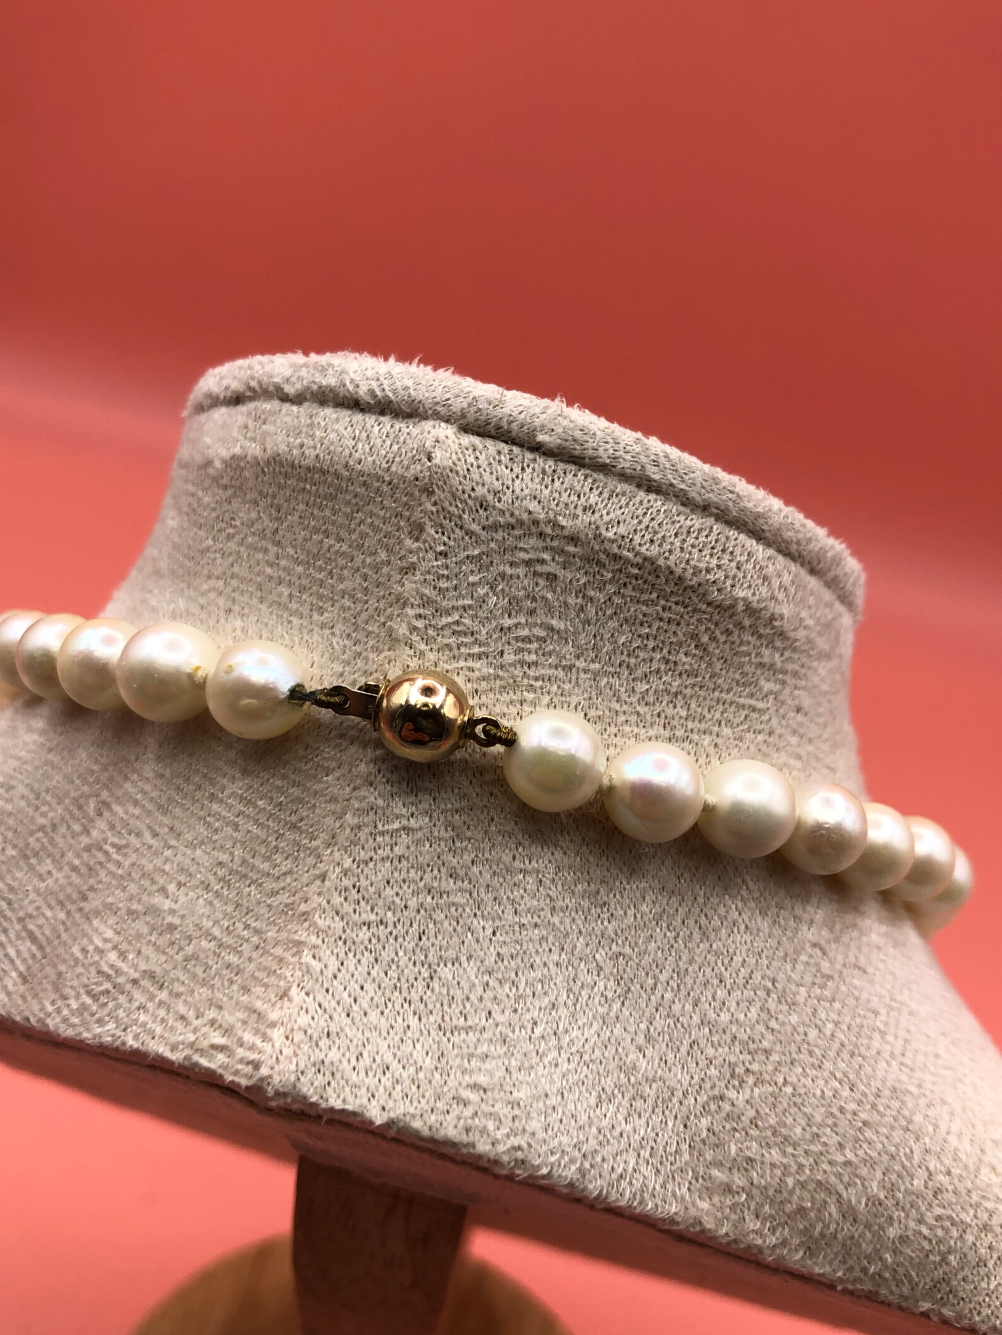 TWO STRINGS OF CULTURED PEARLS. A PINK 82cm ROPE WITH A 9ct HALLMARKED GOLD CLASP, AND A FURTHER - Image 6 of 6